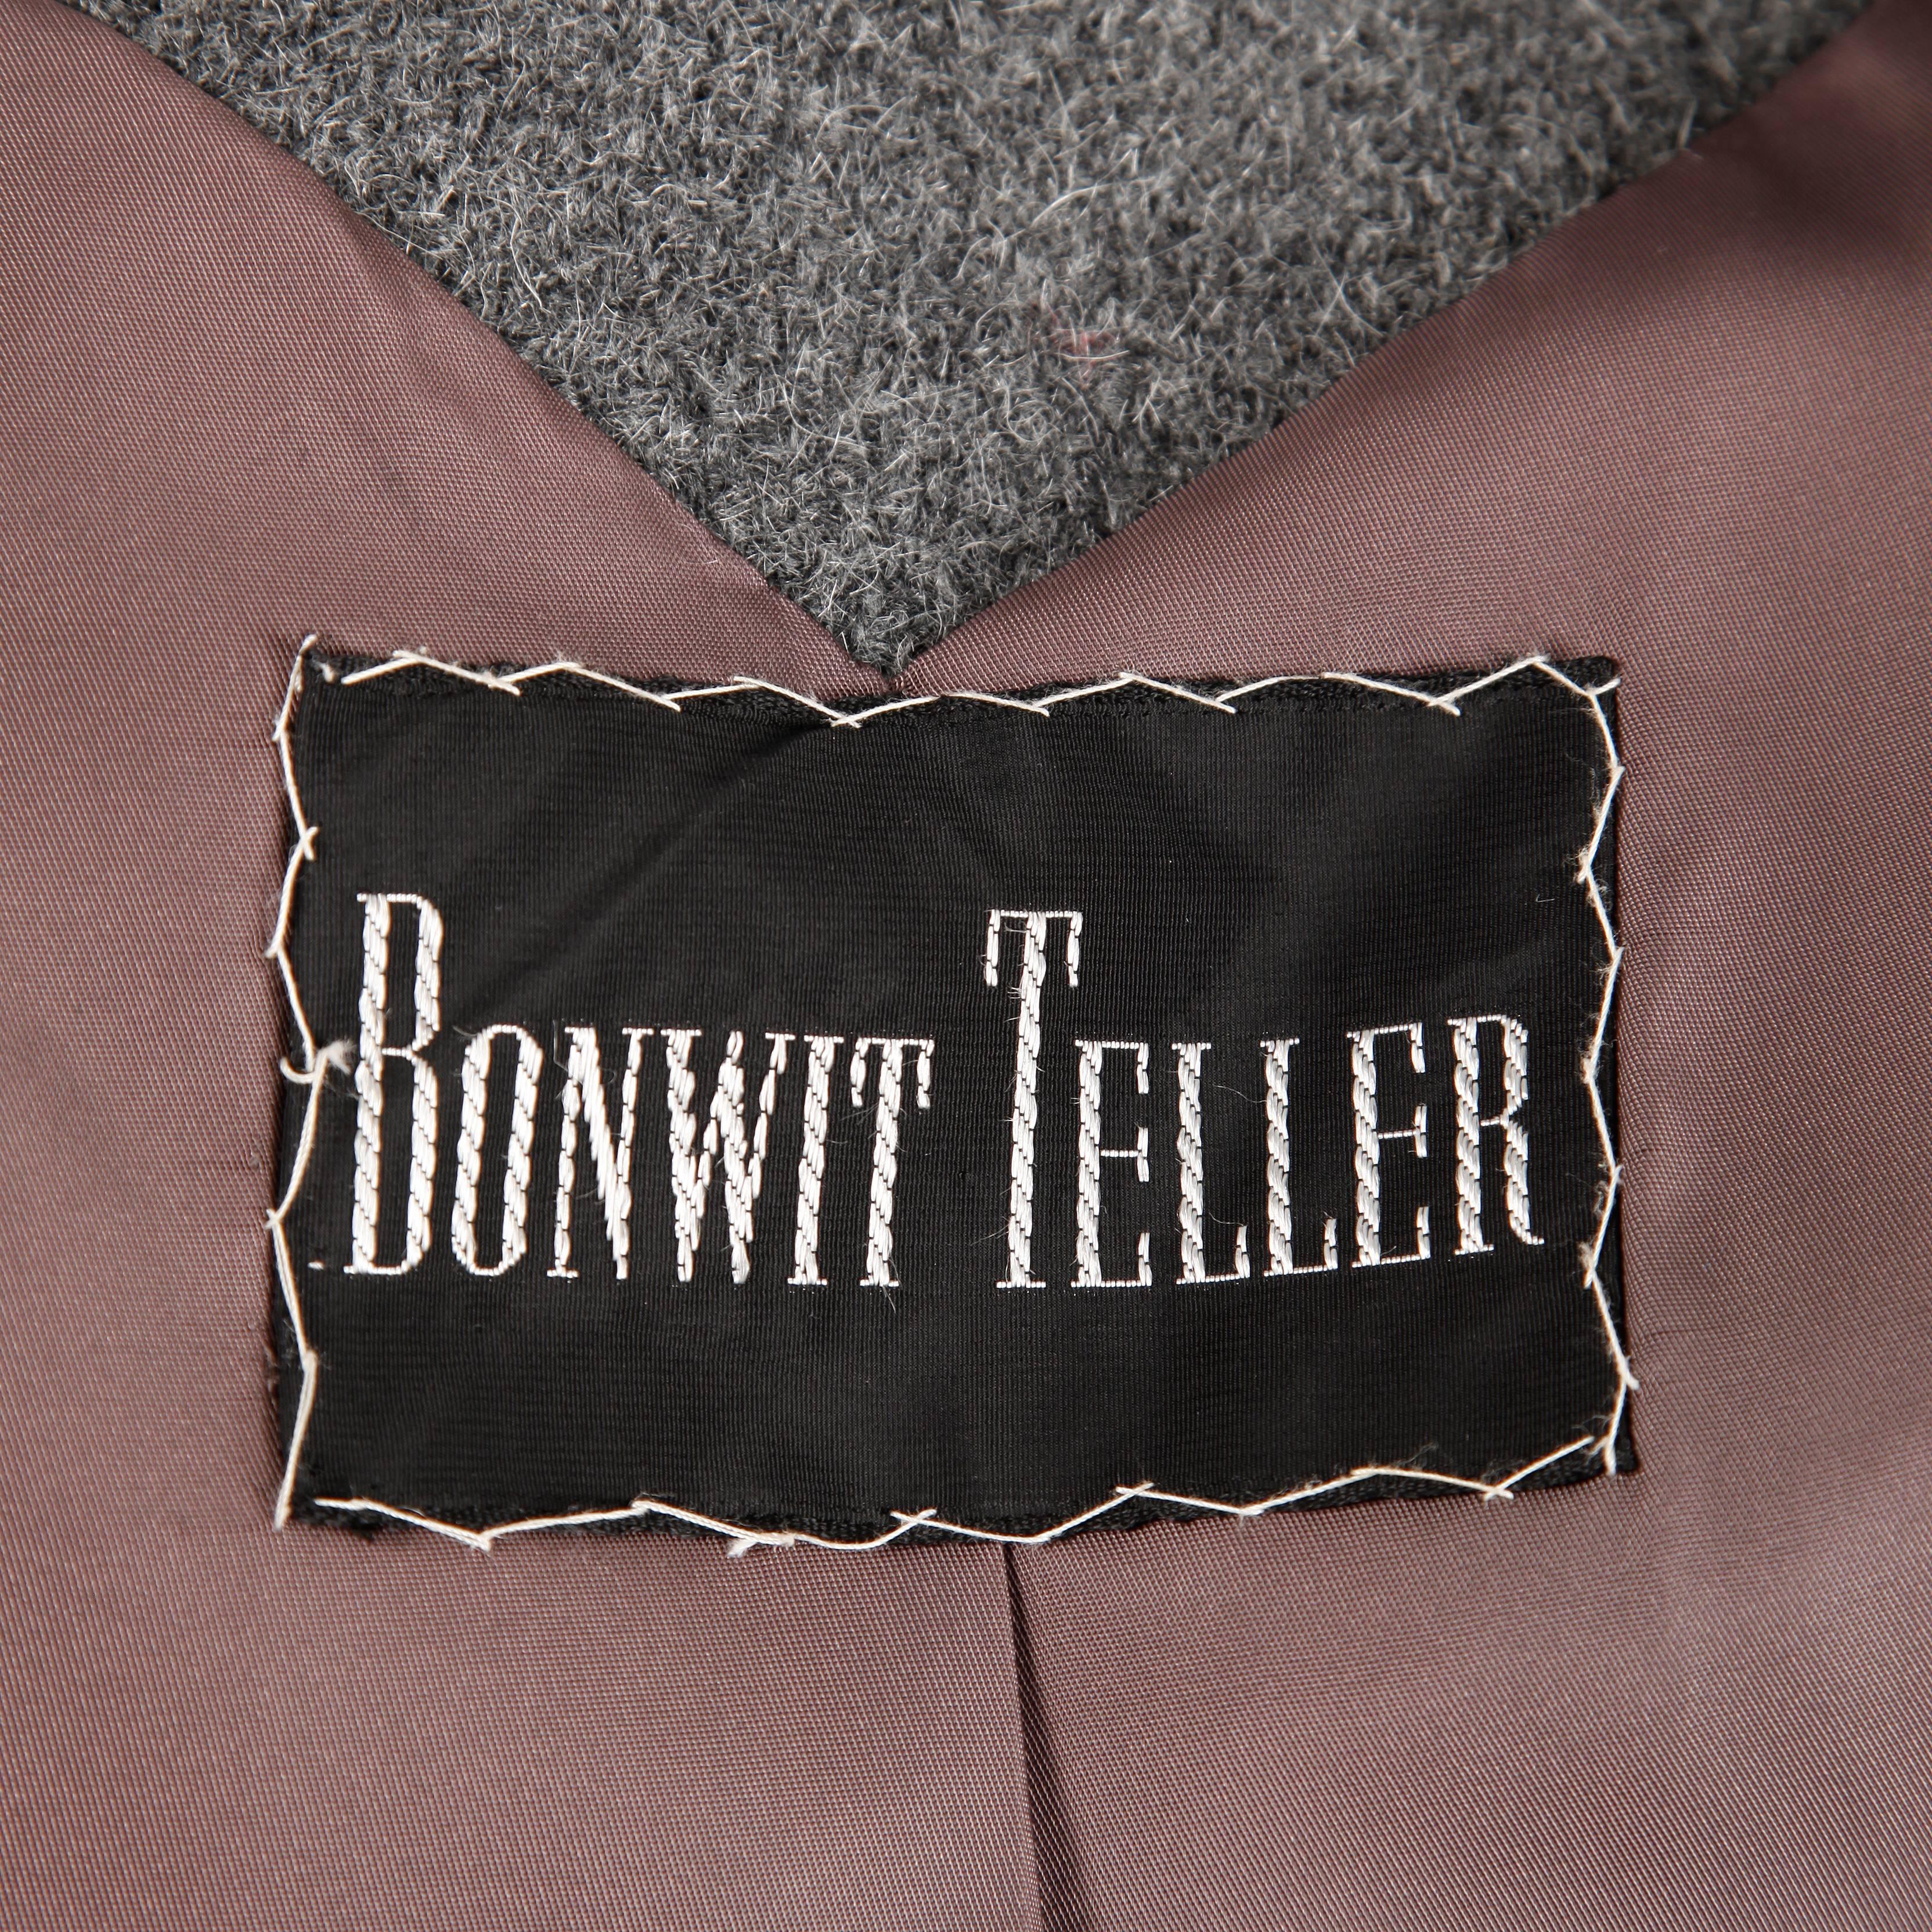 Winter weight heavy wool military-inspired coat by Bonwit Teller. This is well made to keep you warm on the chilliest of days! Gorgeous construction with heavy satin lining and metal buttons.

Details: 

Fully Lined
Side Seam Pockets
Button